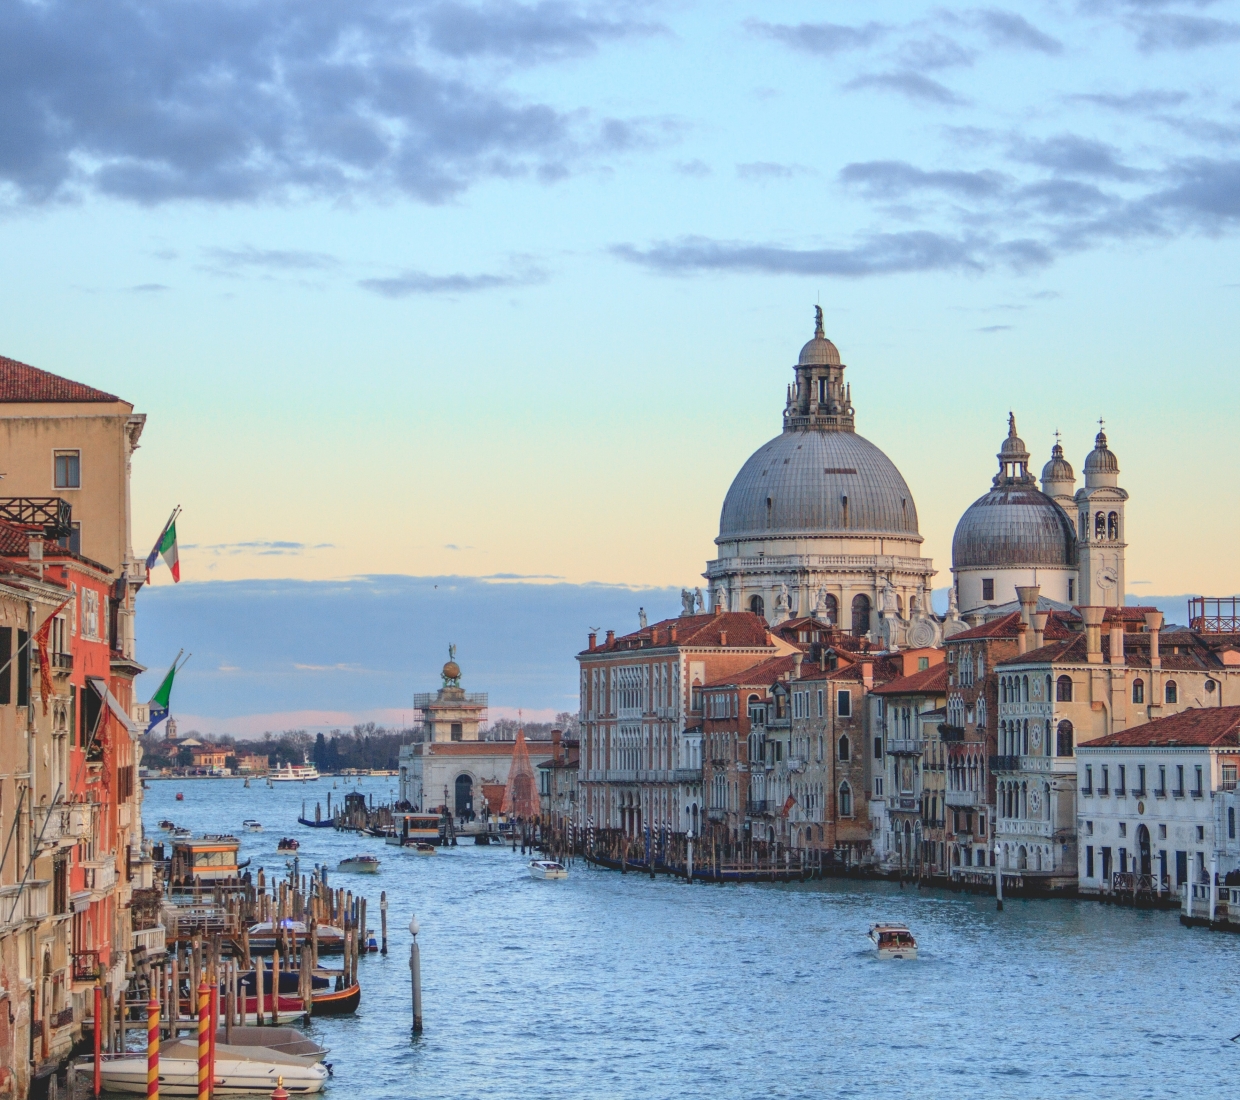 Beautiful bed & breakfasts in Venice, charming guest houses and Palazzi in Venice